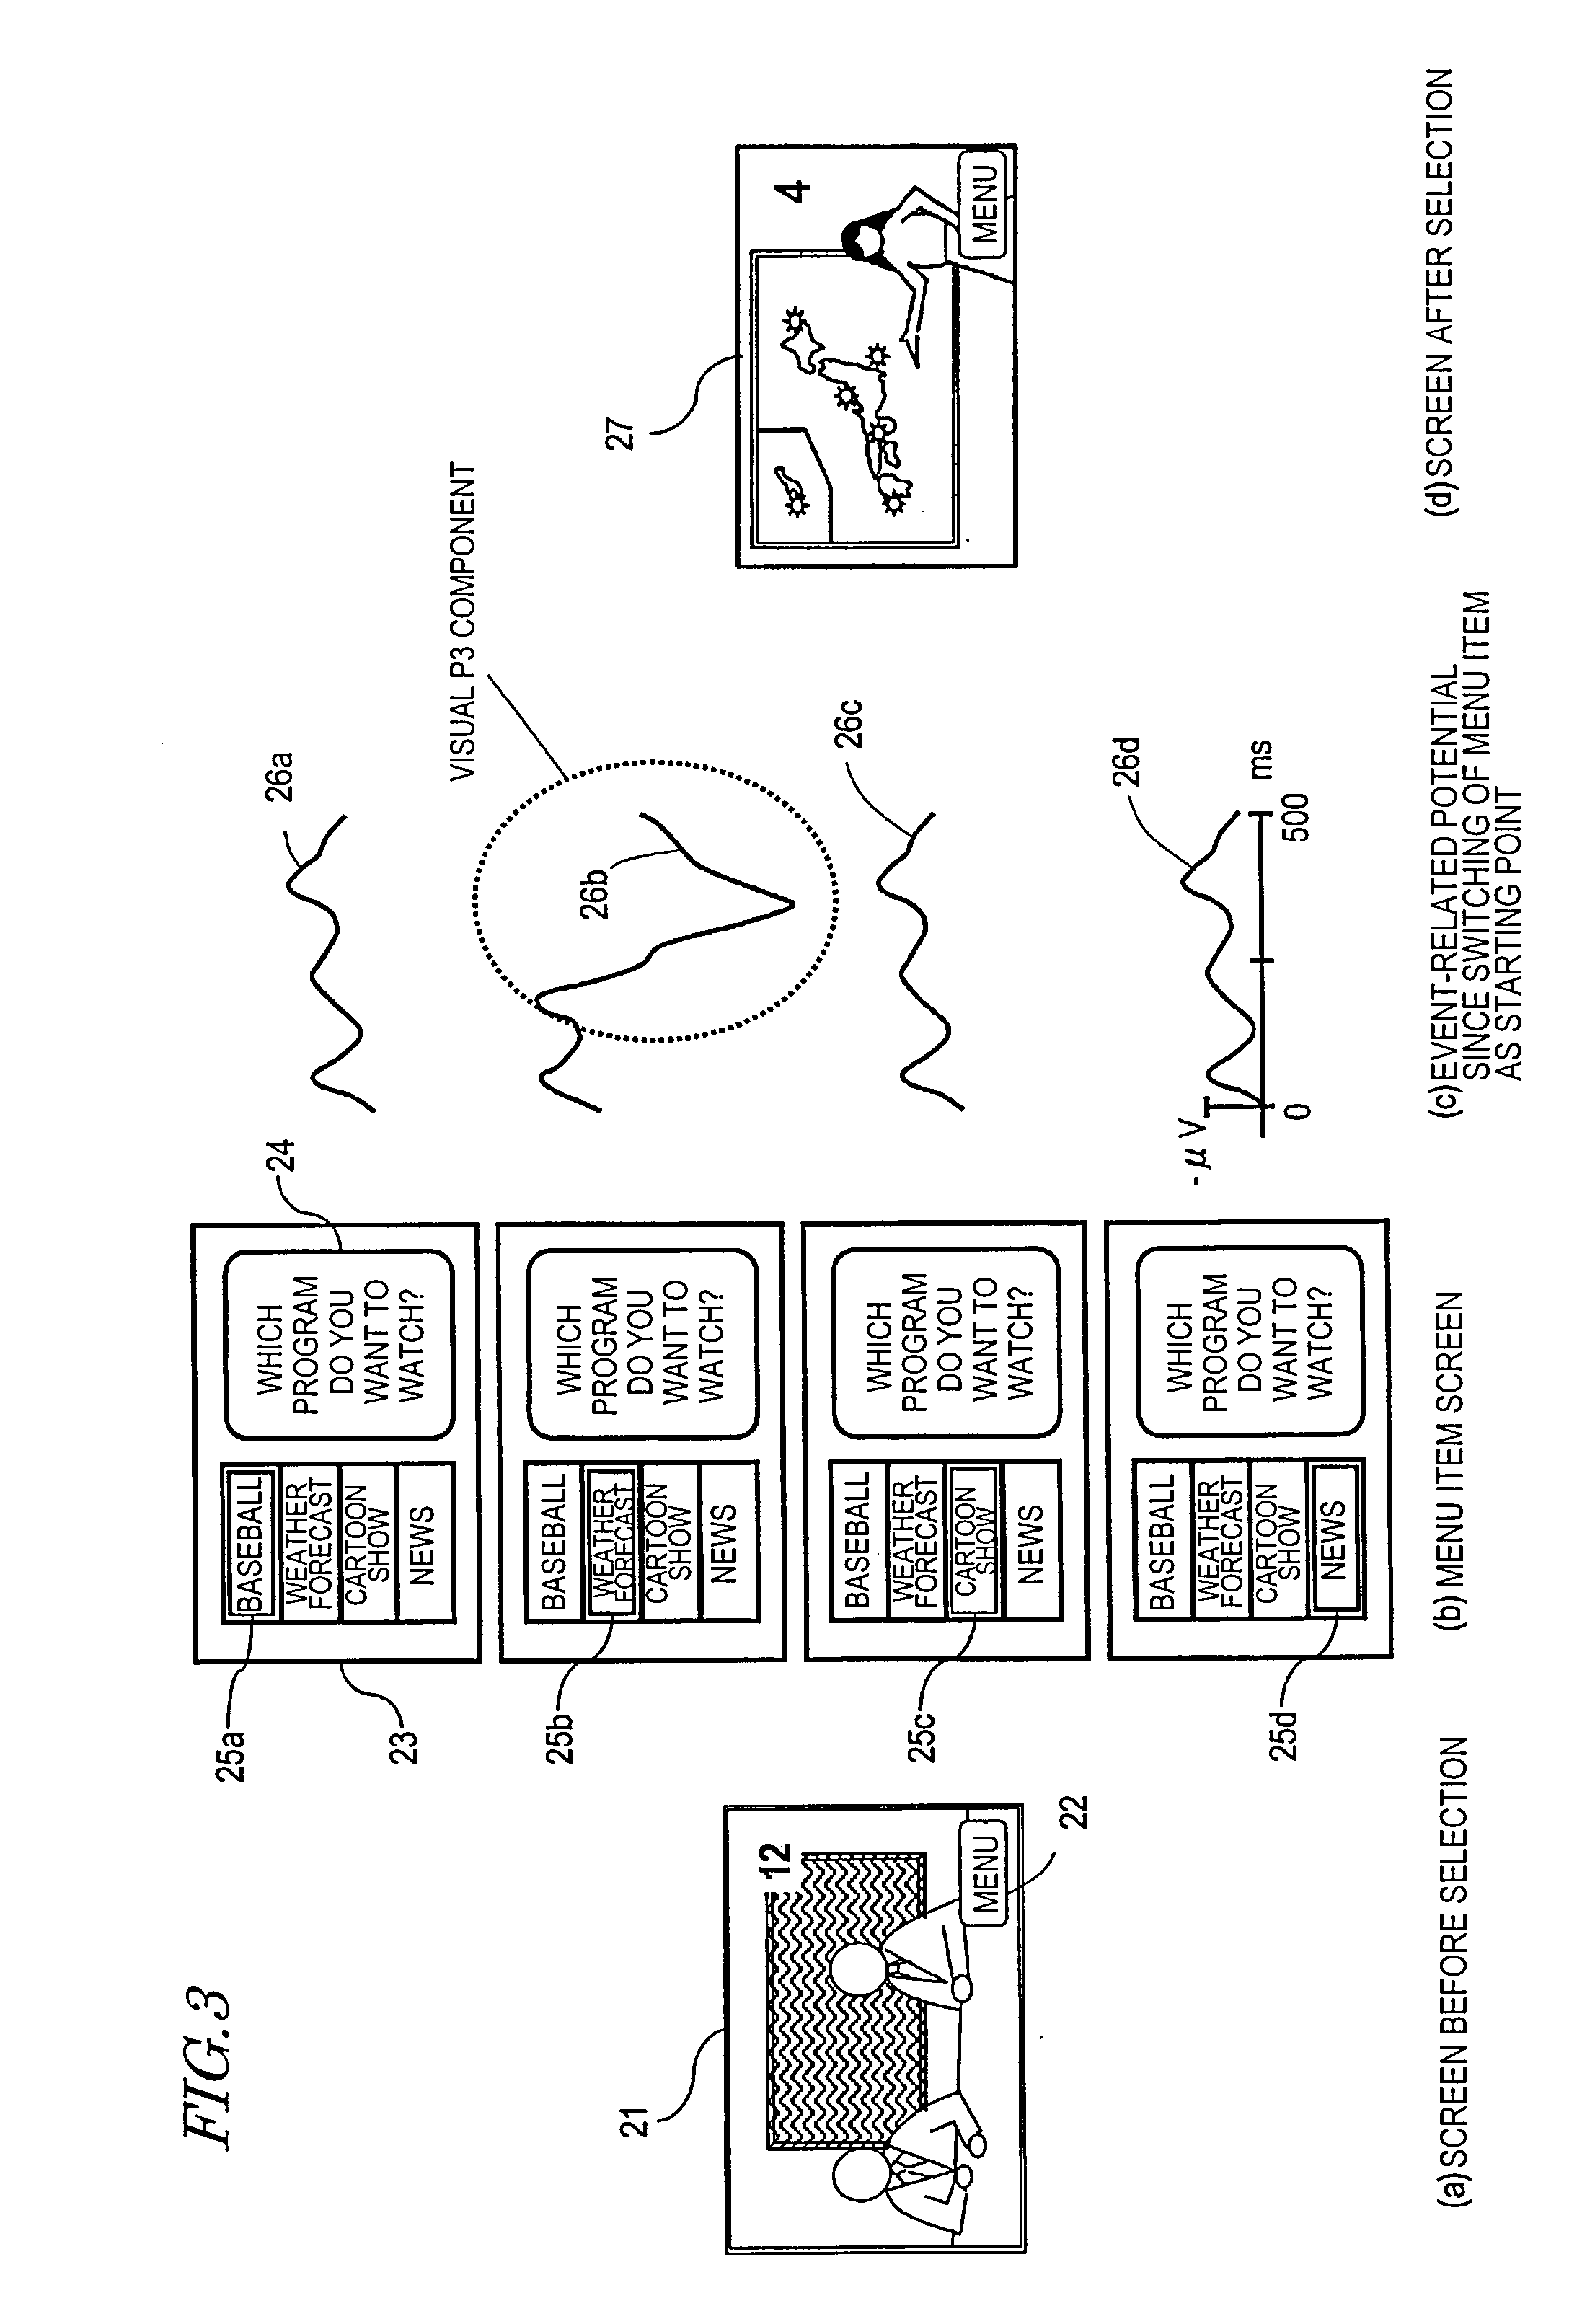 Electroencephalogram interface system and activation apparatus